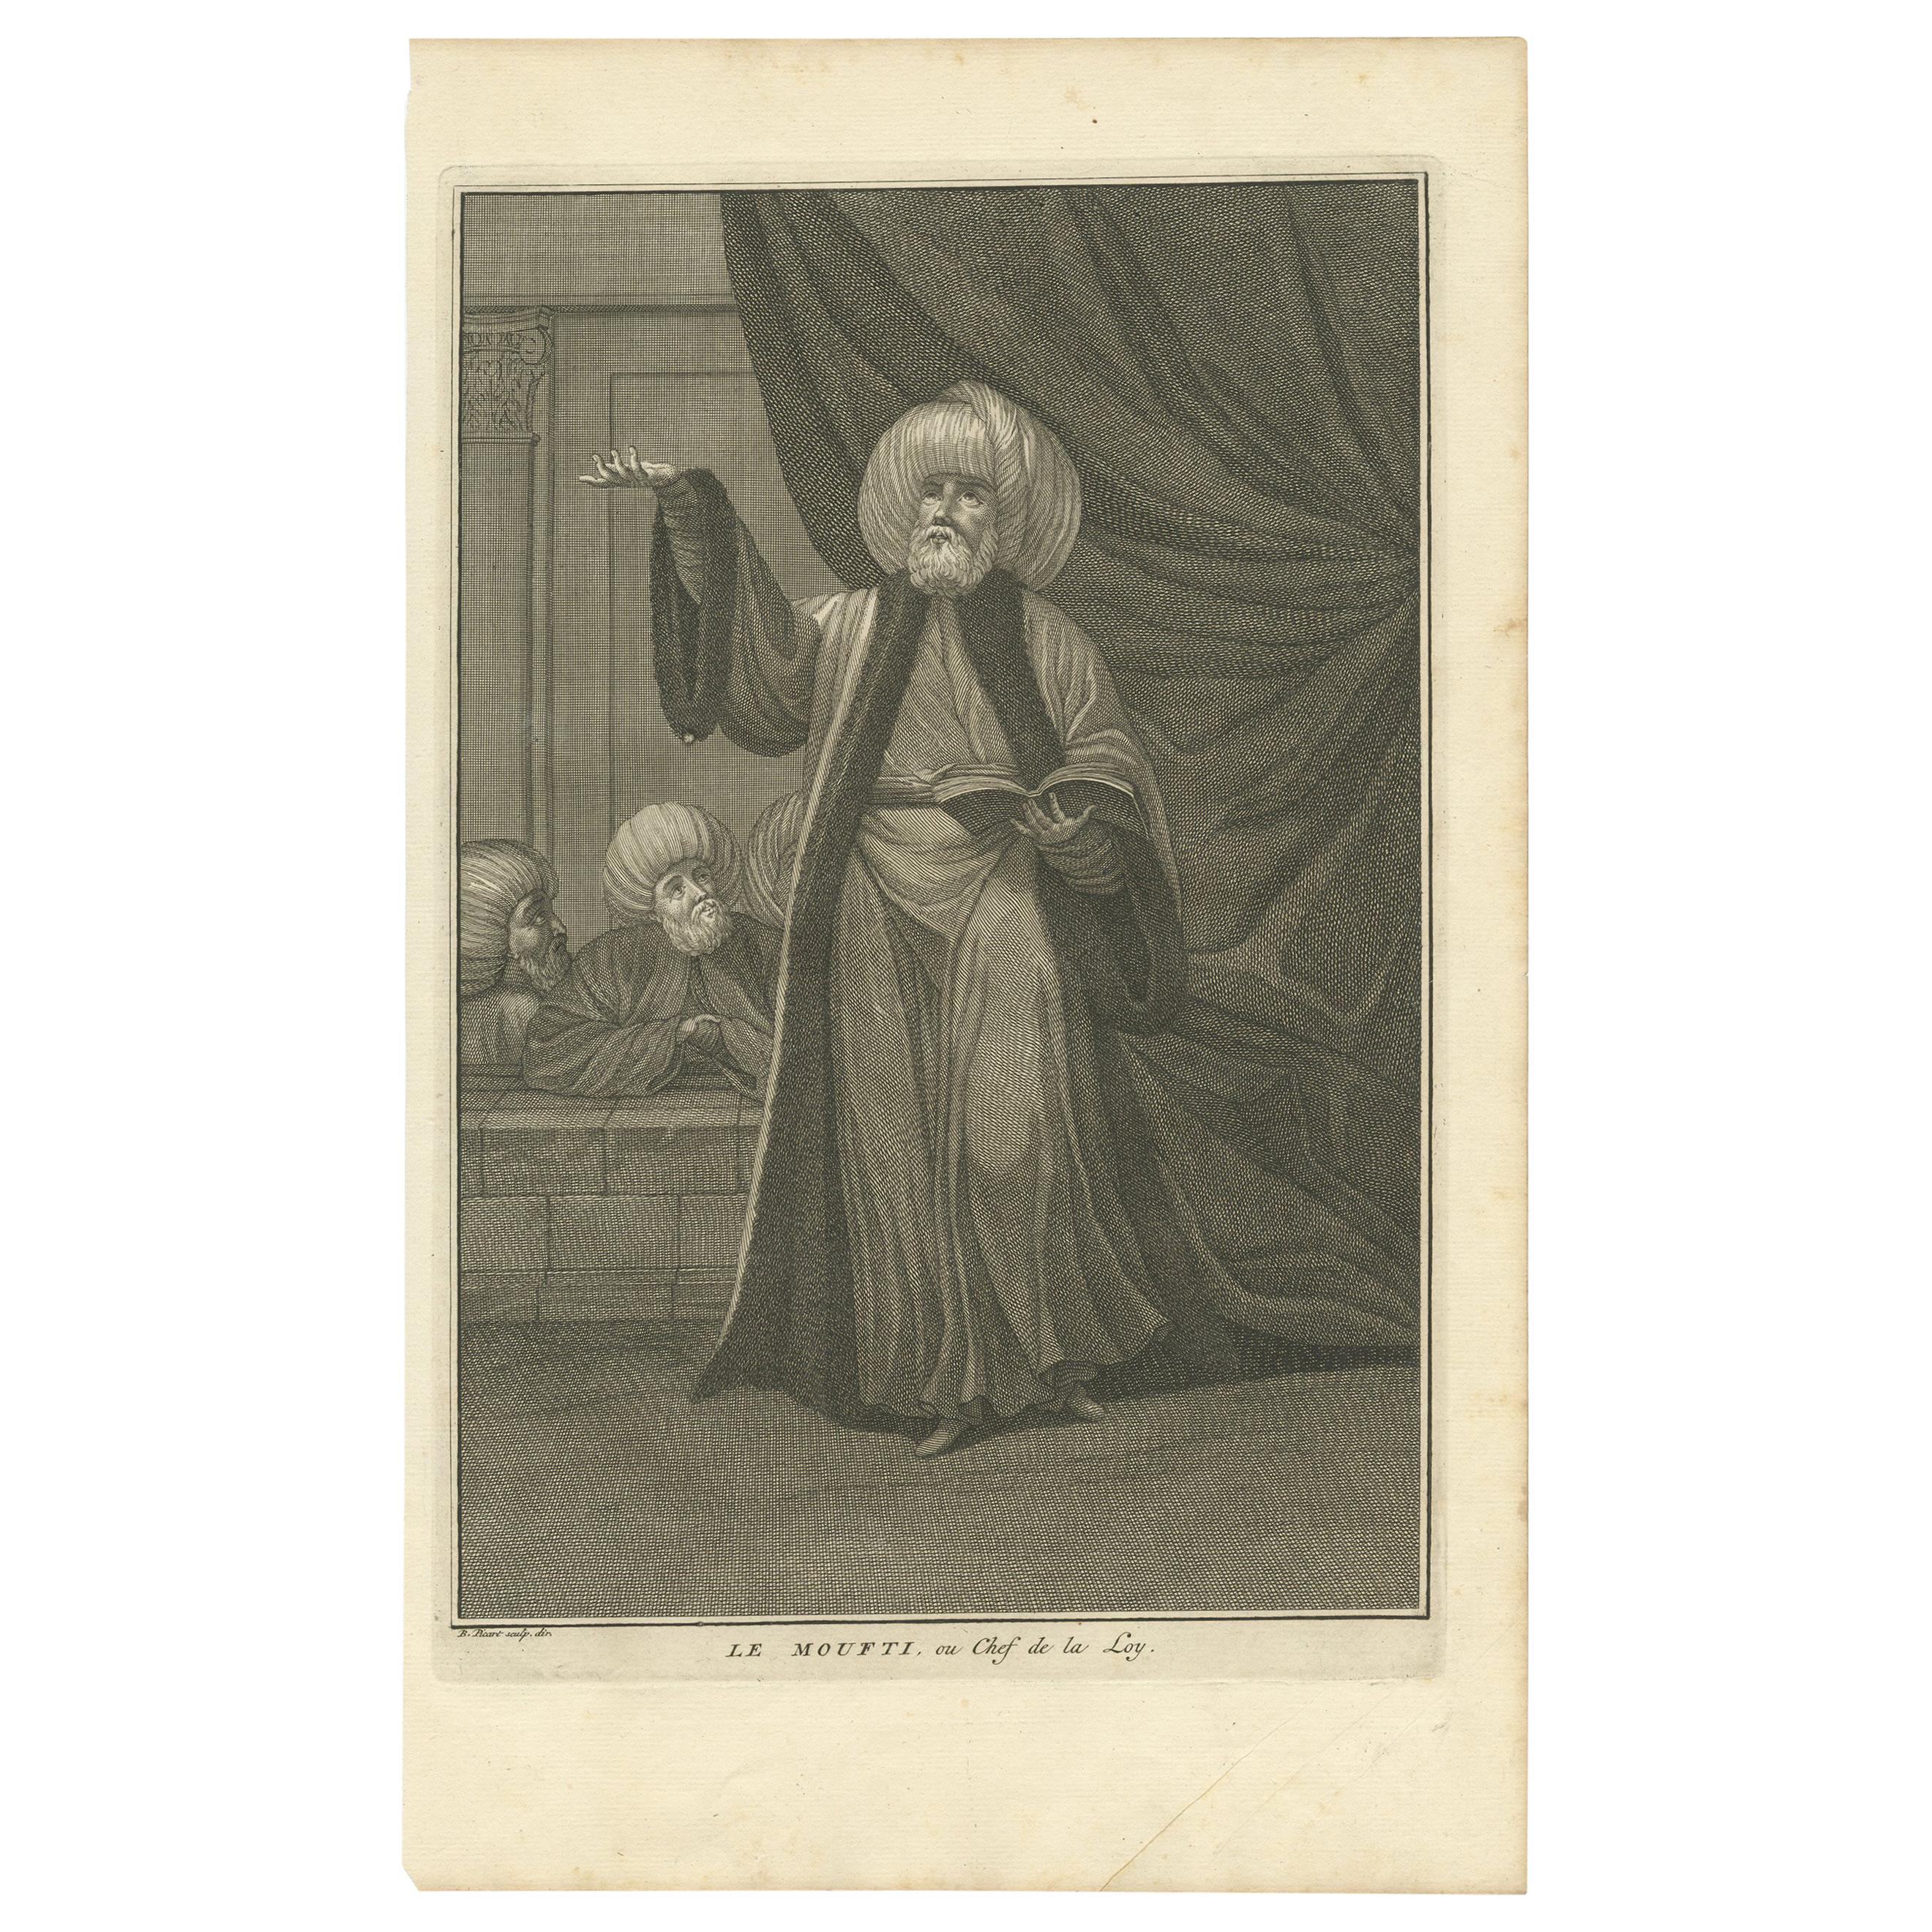 Antique Portrait of the Mufti by Picart, circa 1725